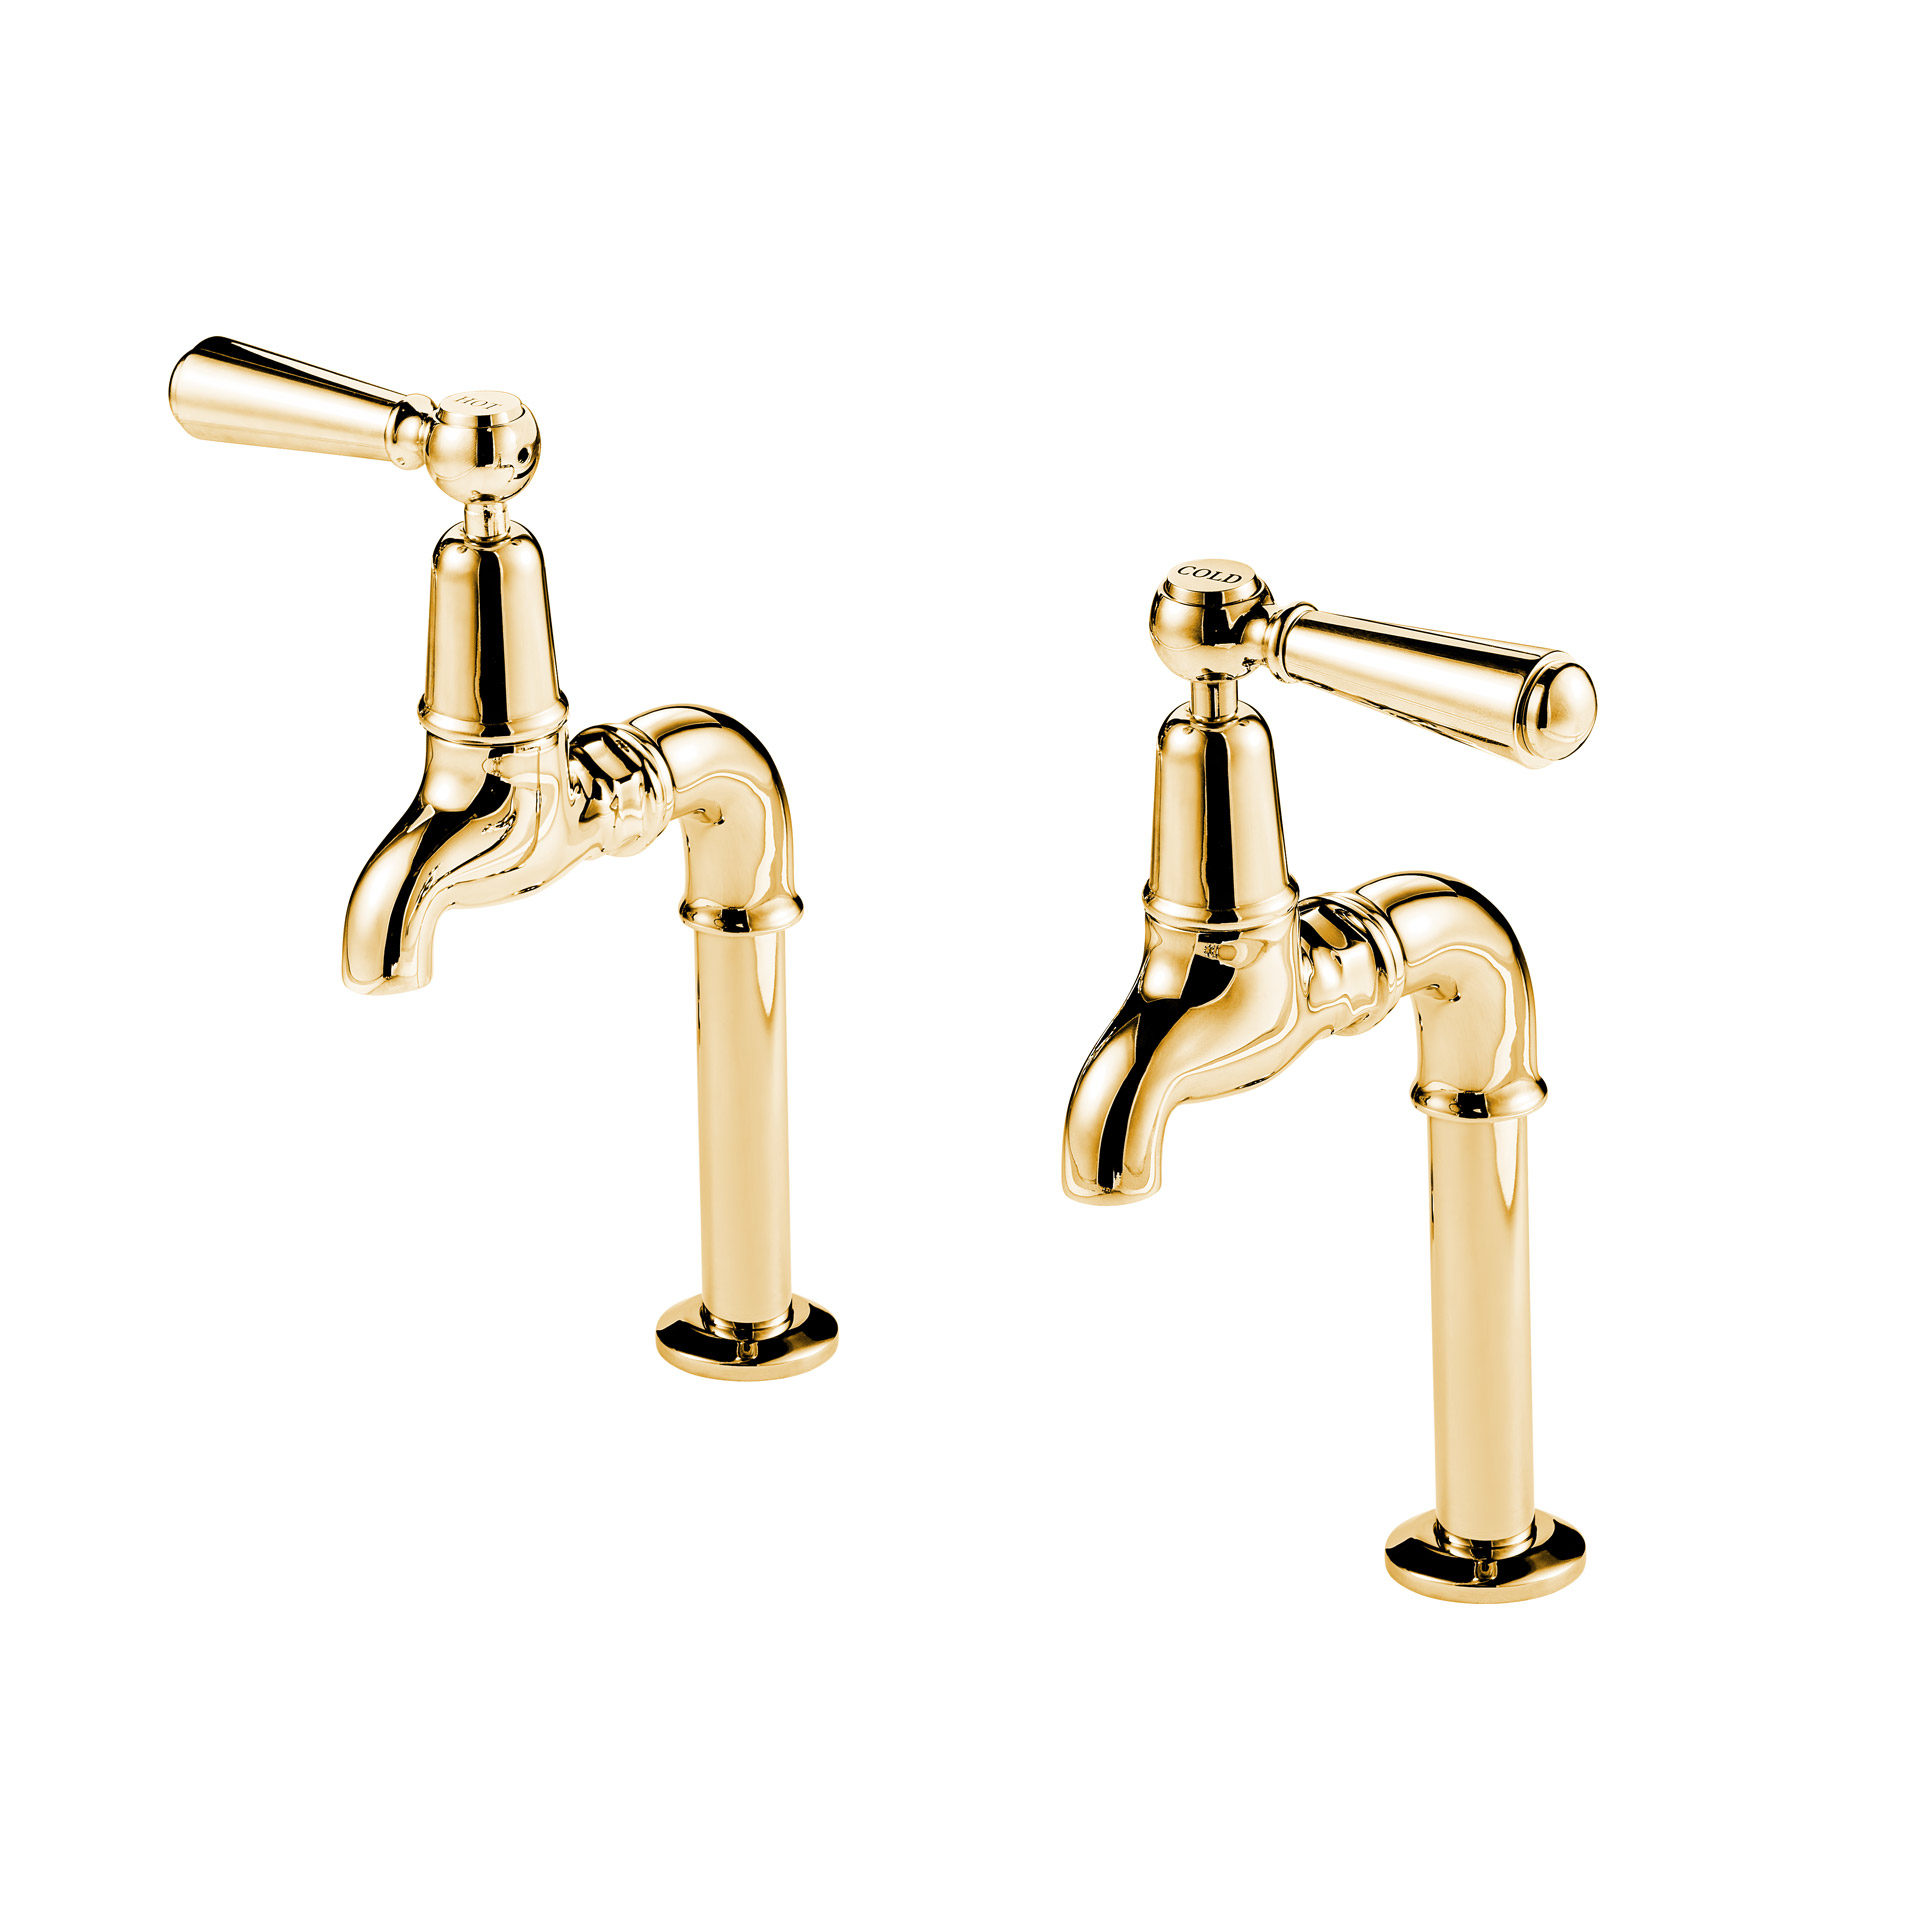 Barber Wilsons 6 Inch Deck Mounted Bib Taps in Polished Brass with Metal Lever